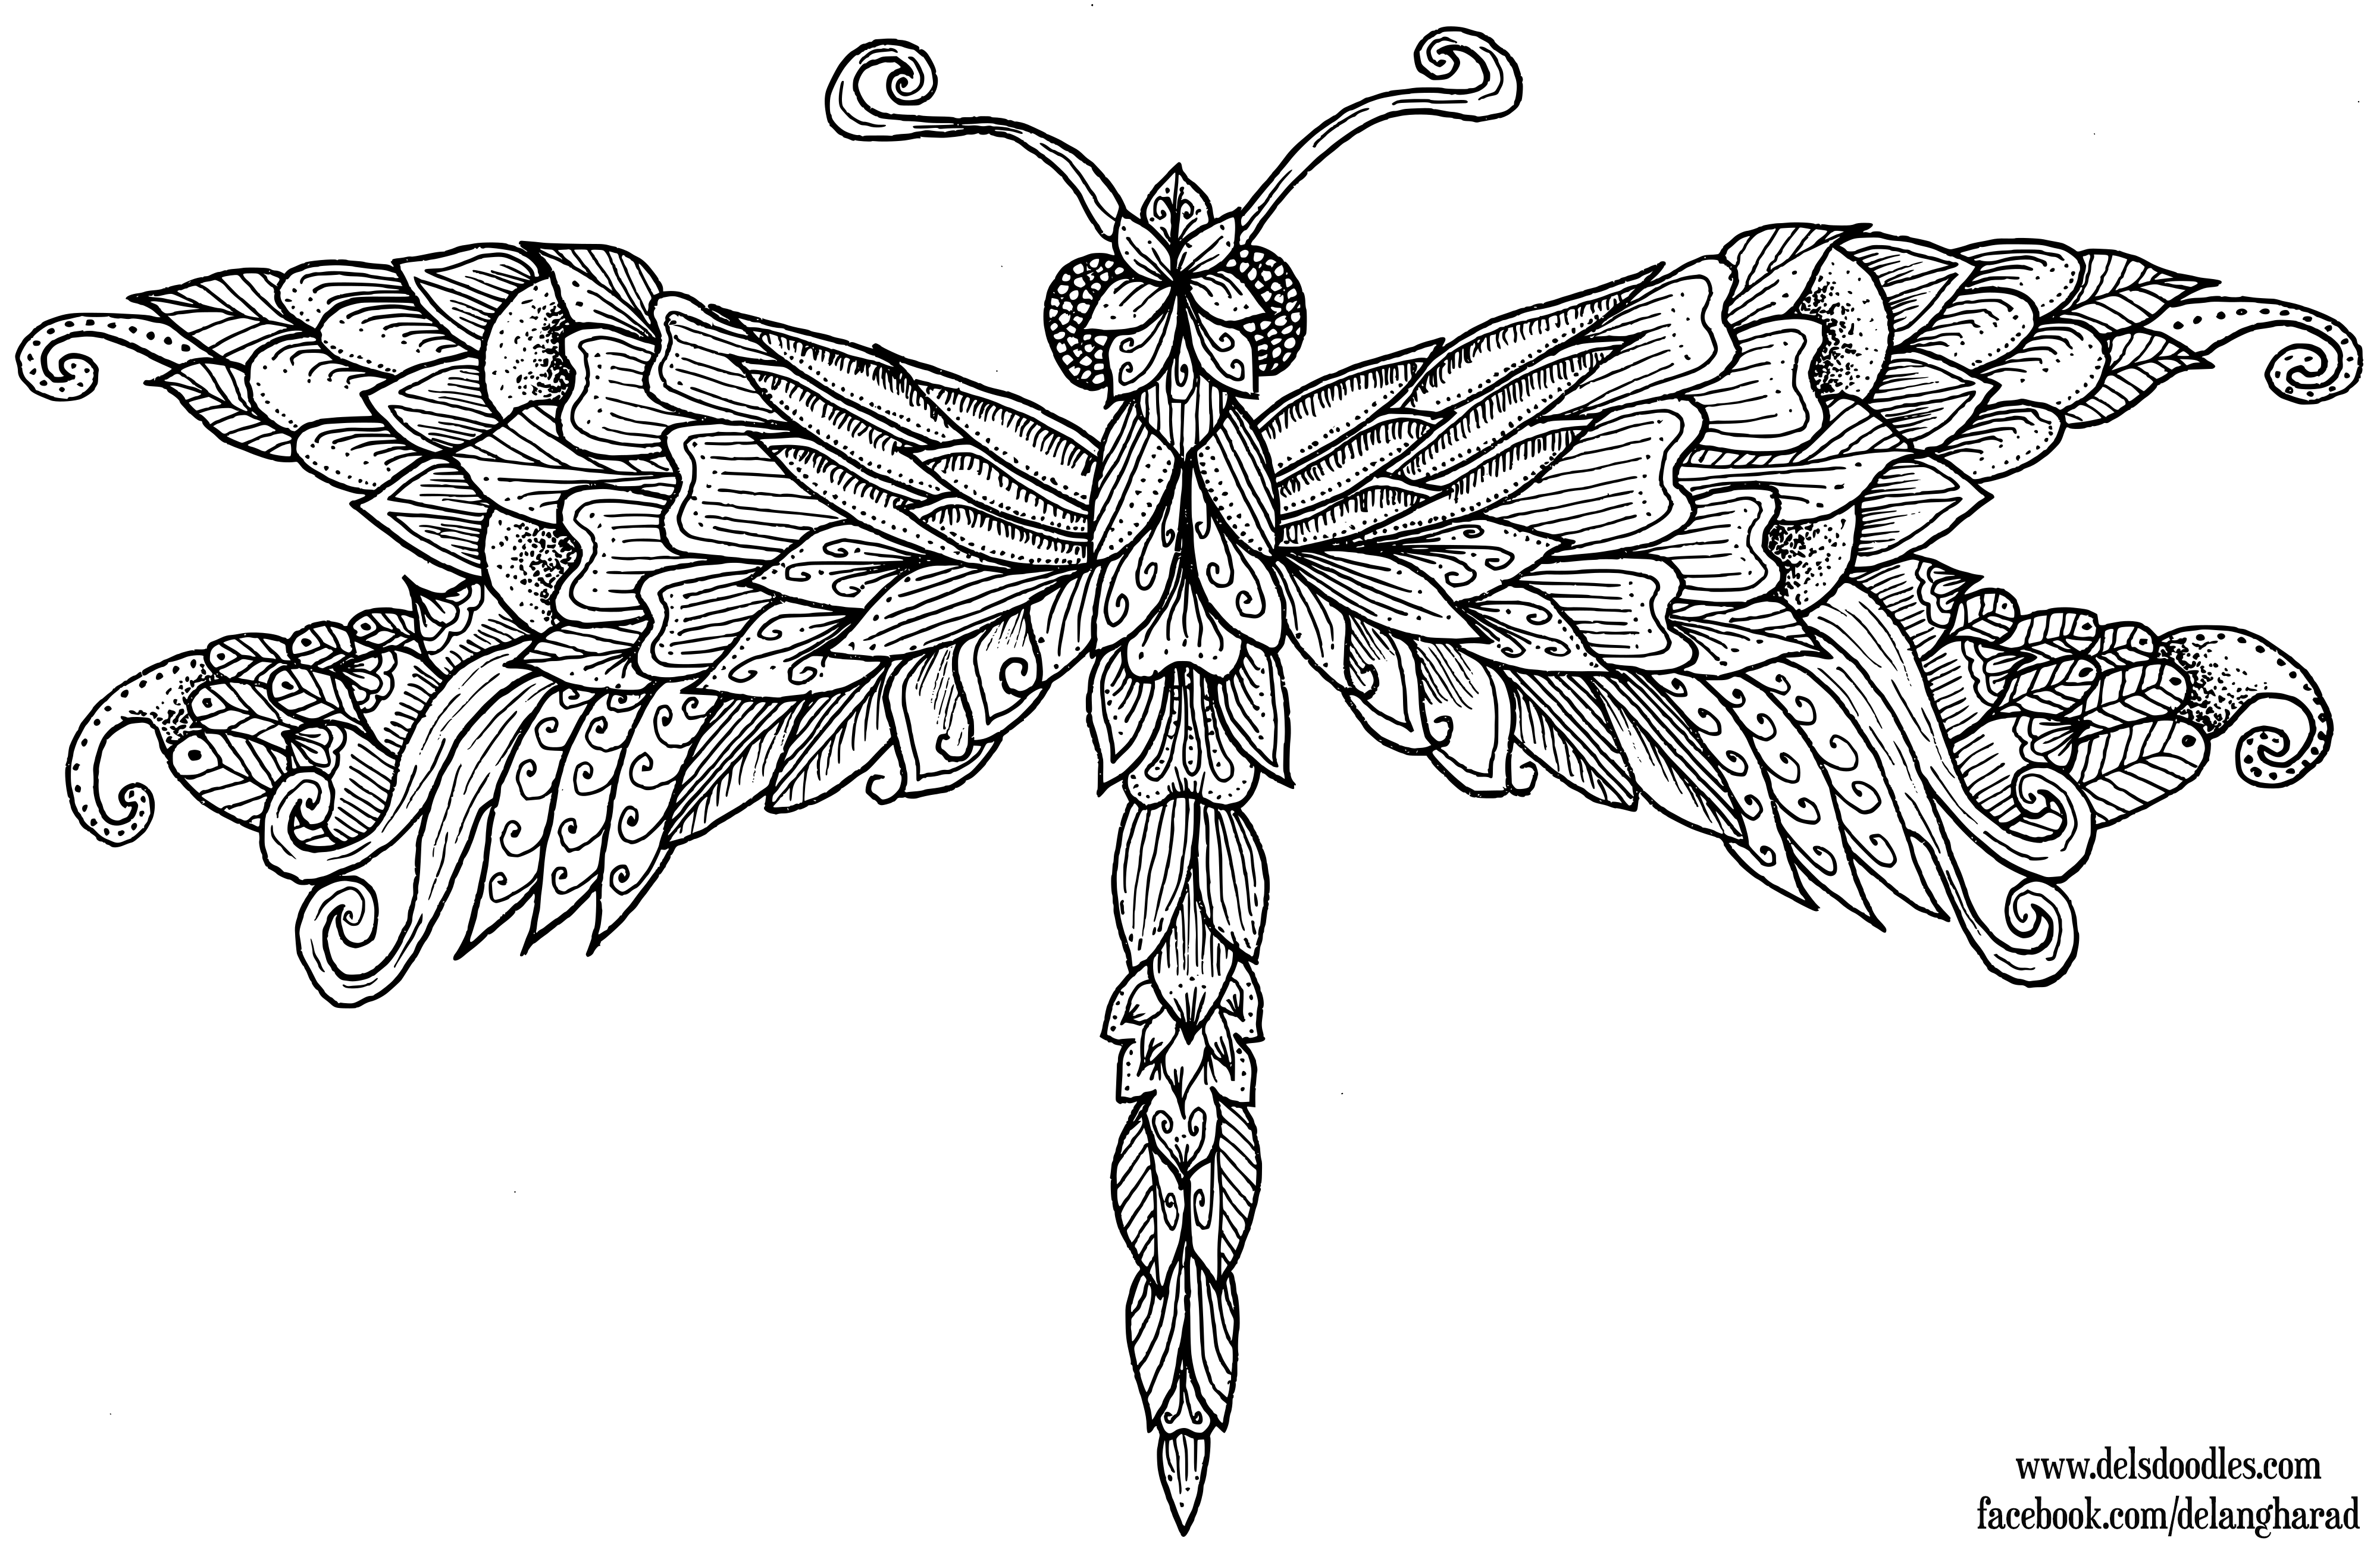 dragonfly coloring page kid39s corner abc pest control pest control fort myers page coloring dragonfly 